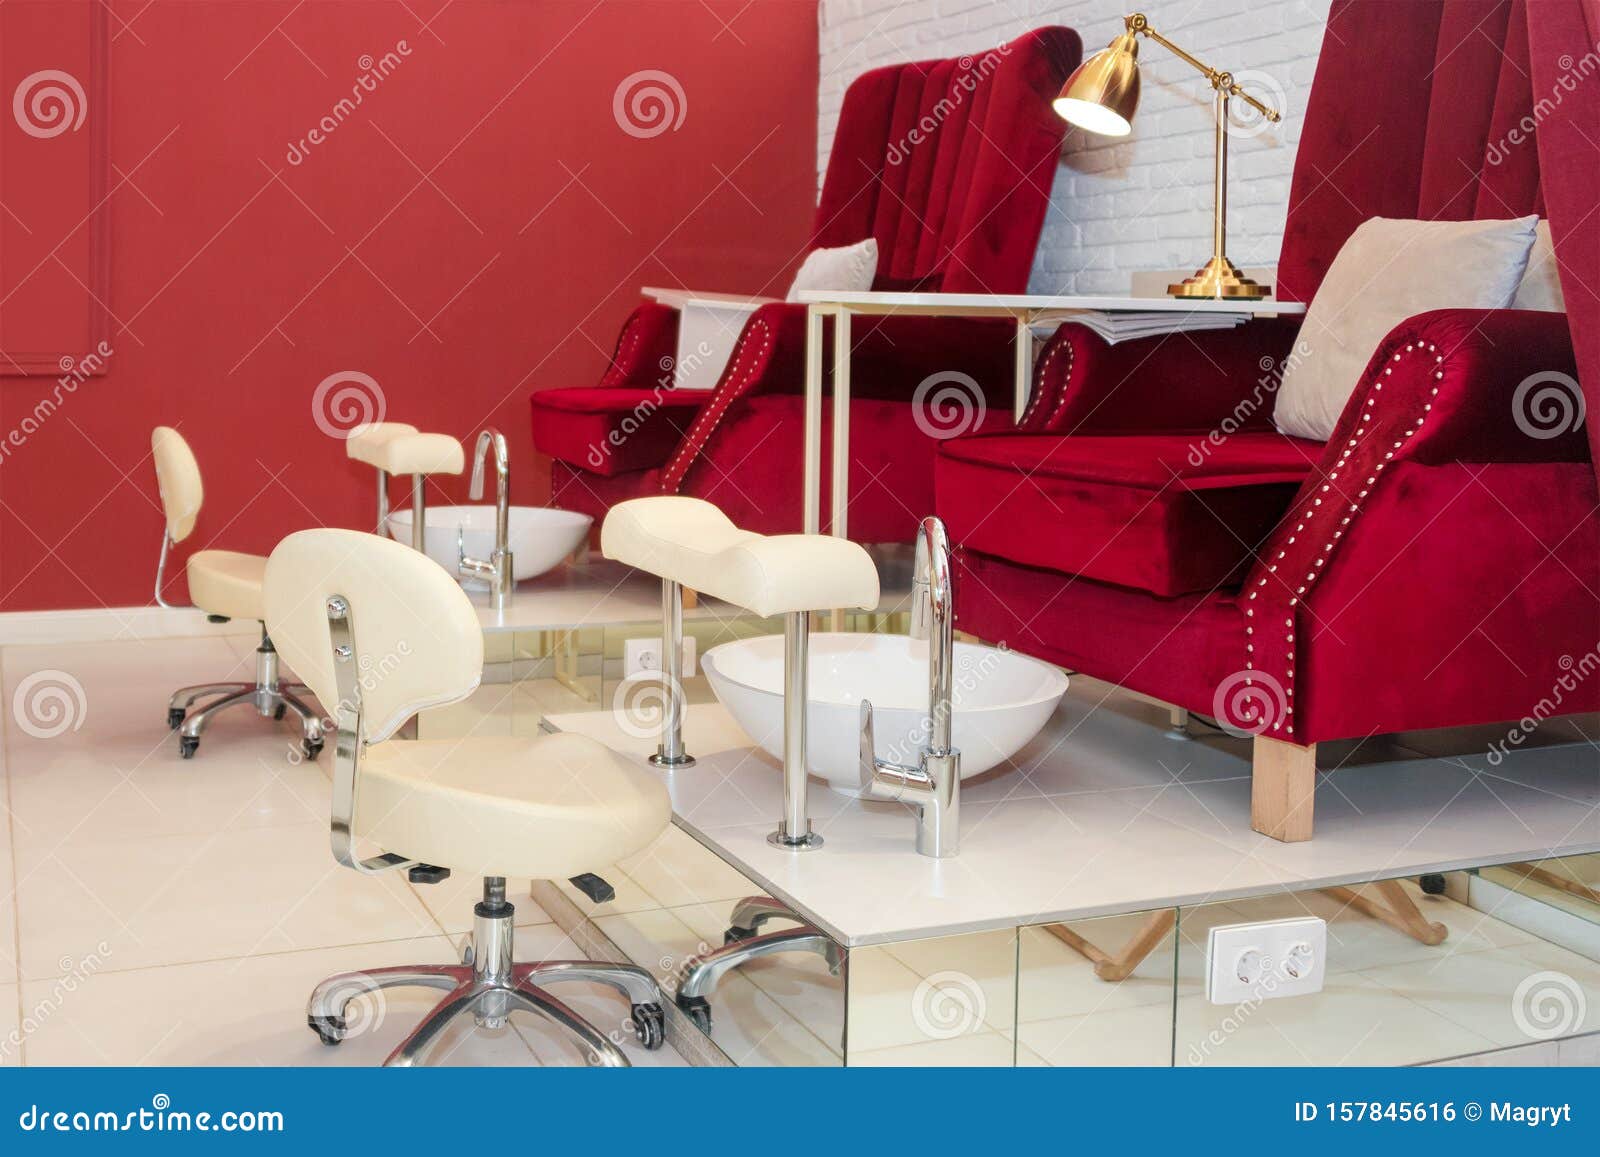 Surrey Stoffig Trappenhuis Chairs in a Pedicure Beauty Salon. Interior of Empty Modern Nail Salon.  Work Places for Masters of Manicure. Pedicure Cabinet Stock Photo - Image  of contemporary, clean: 157845616